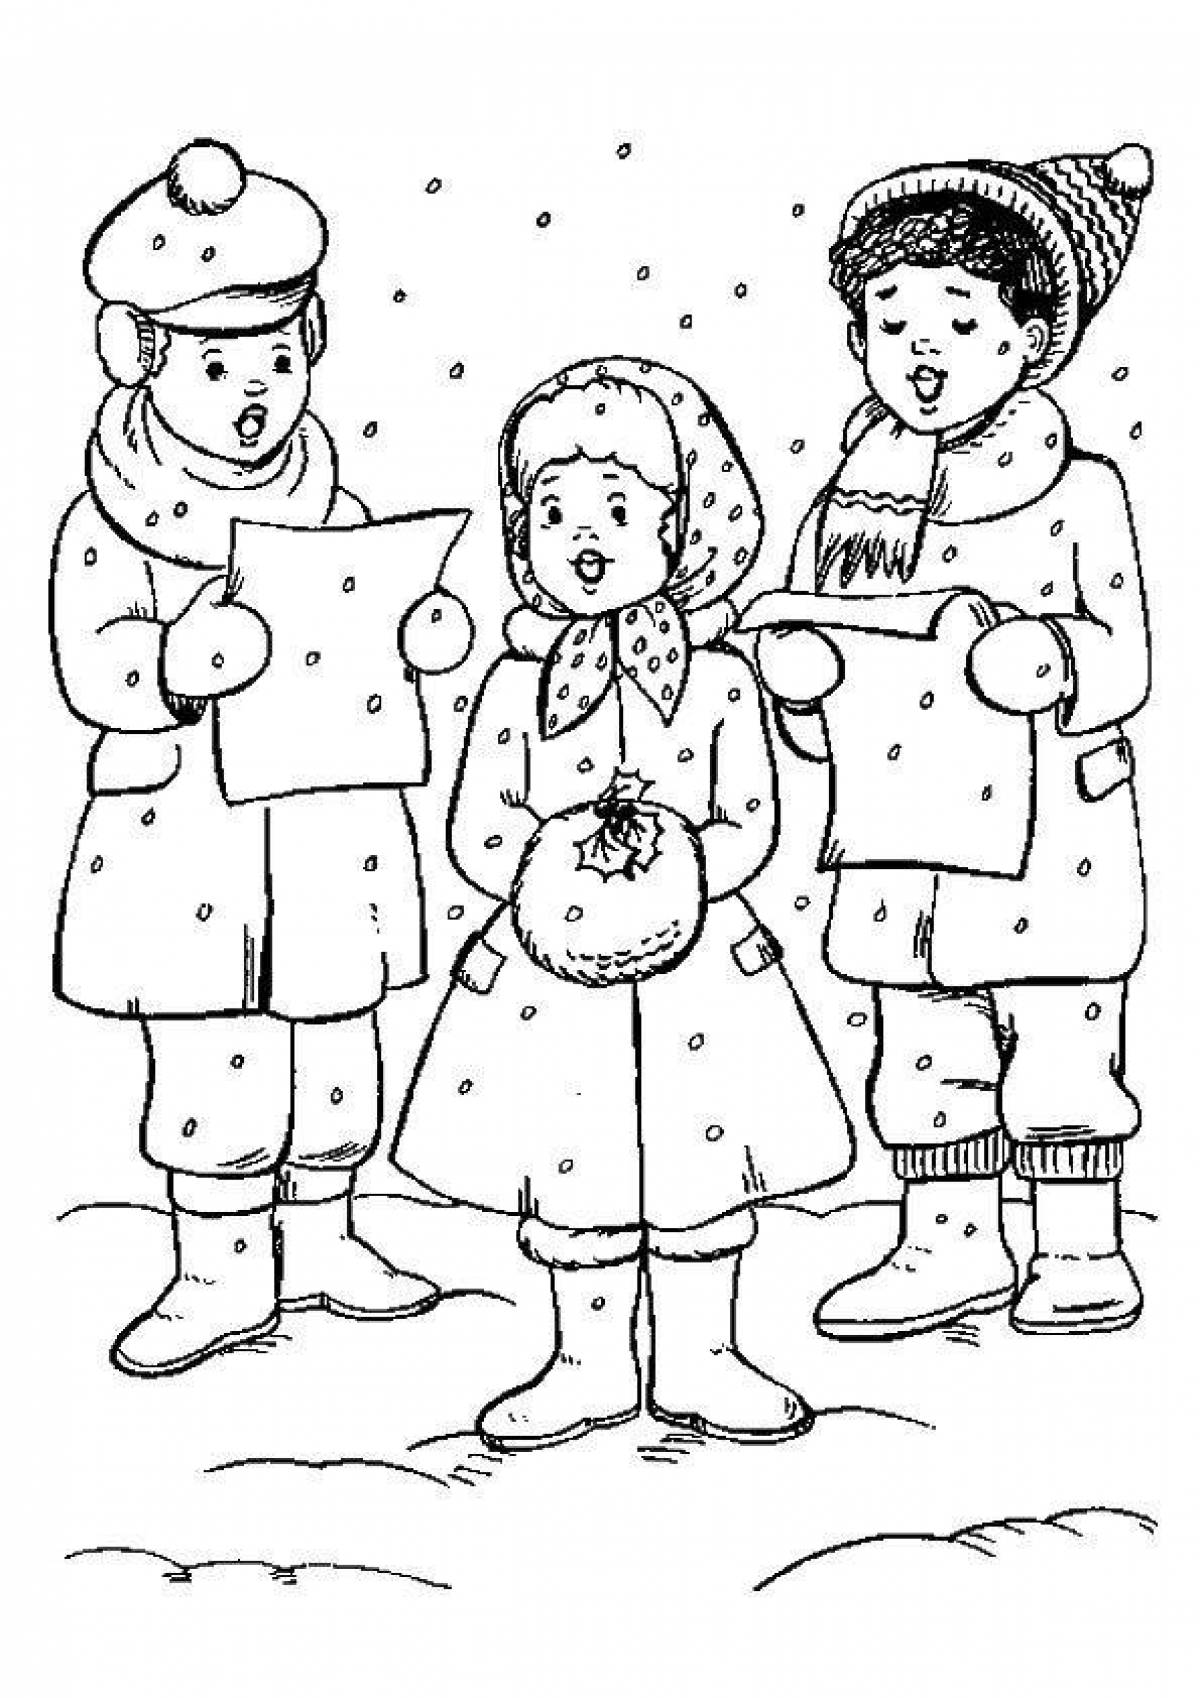 Christmas carols coloring pages for kids